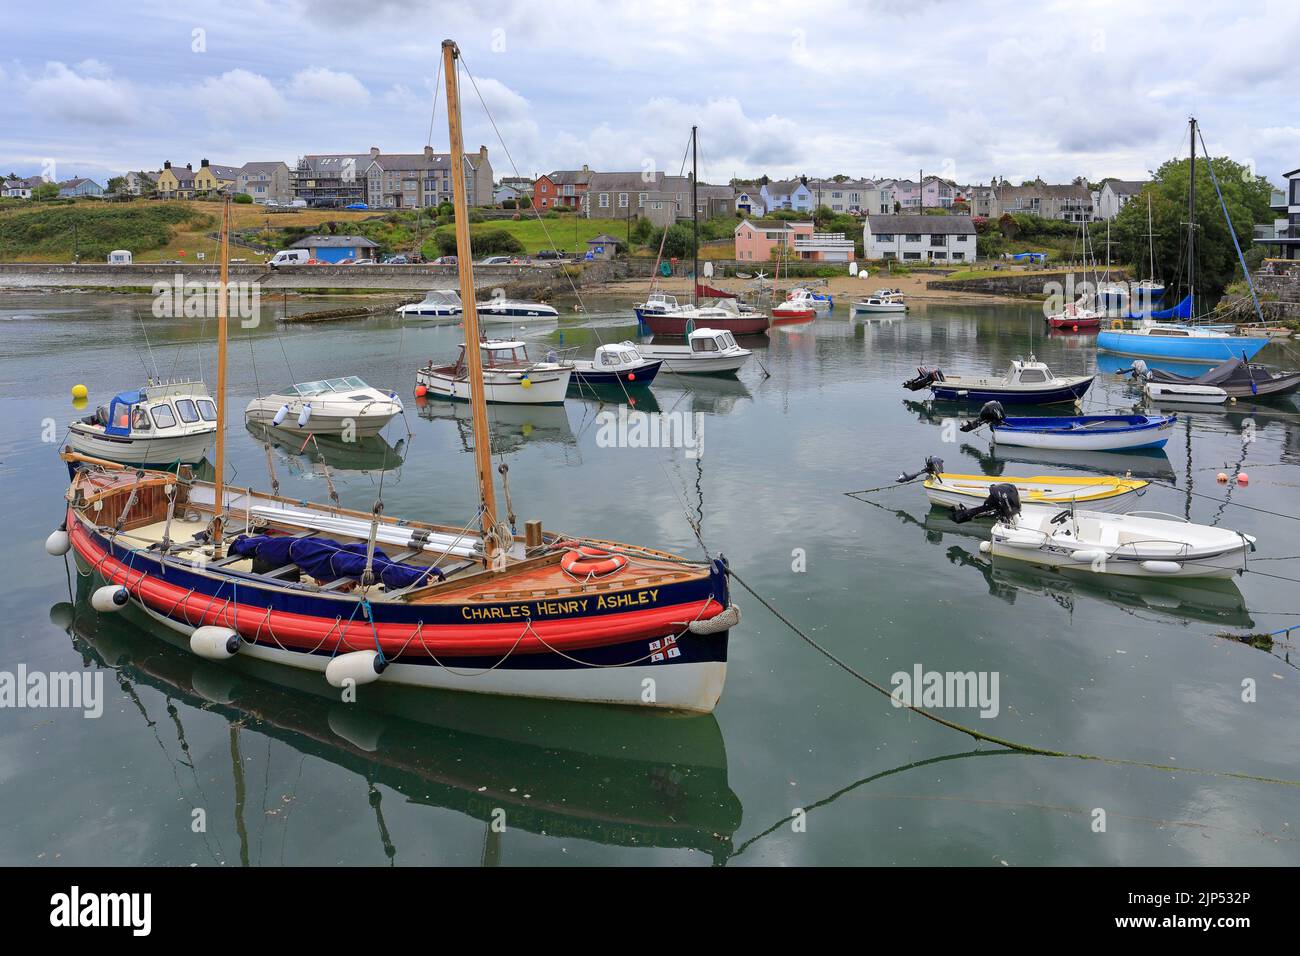 The Charles Henry Ashley former lifeboat in Camaes Bay harbour, Isle of Anglesey, Ynys Mon, North Wales, UK. Stock Photo